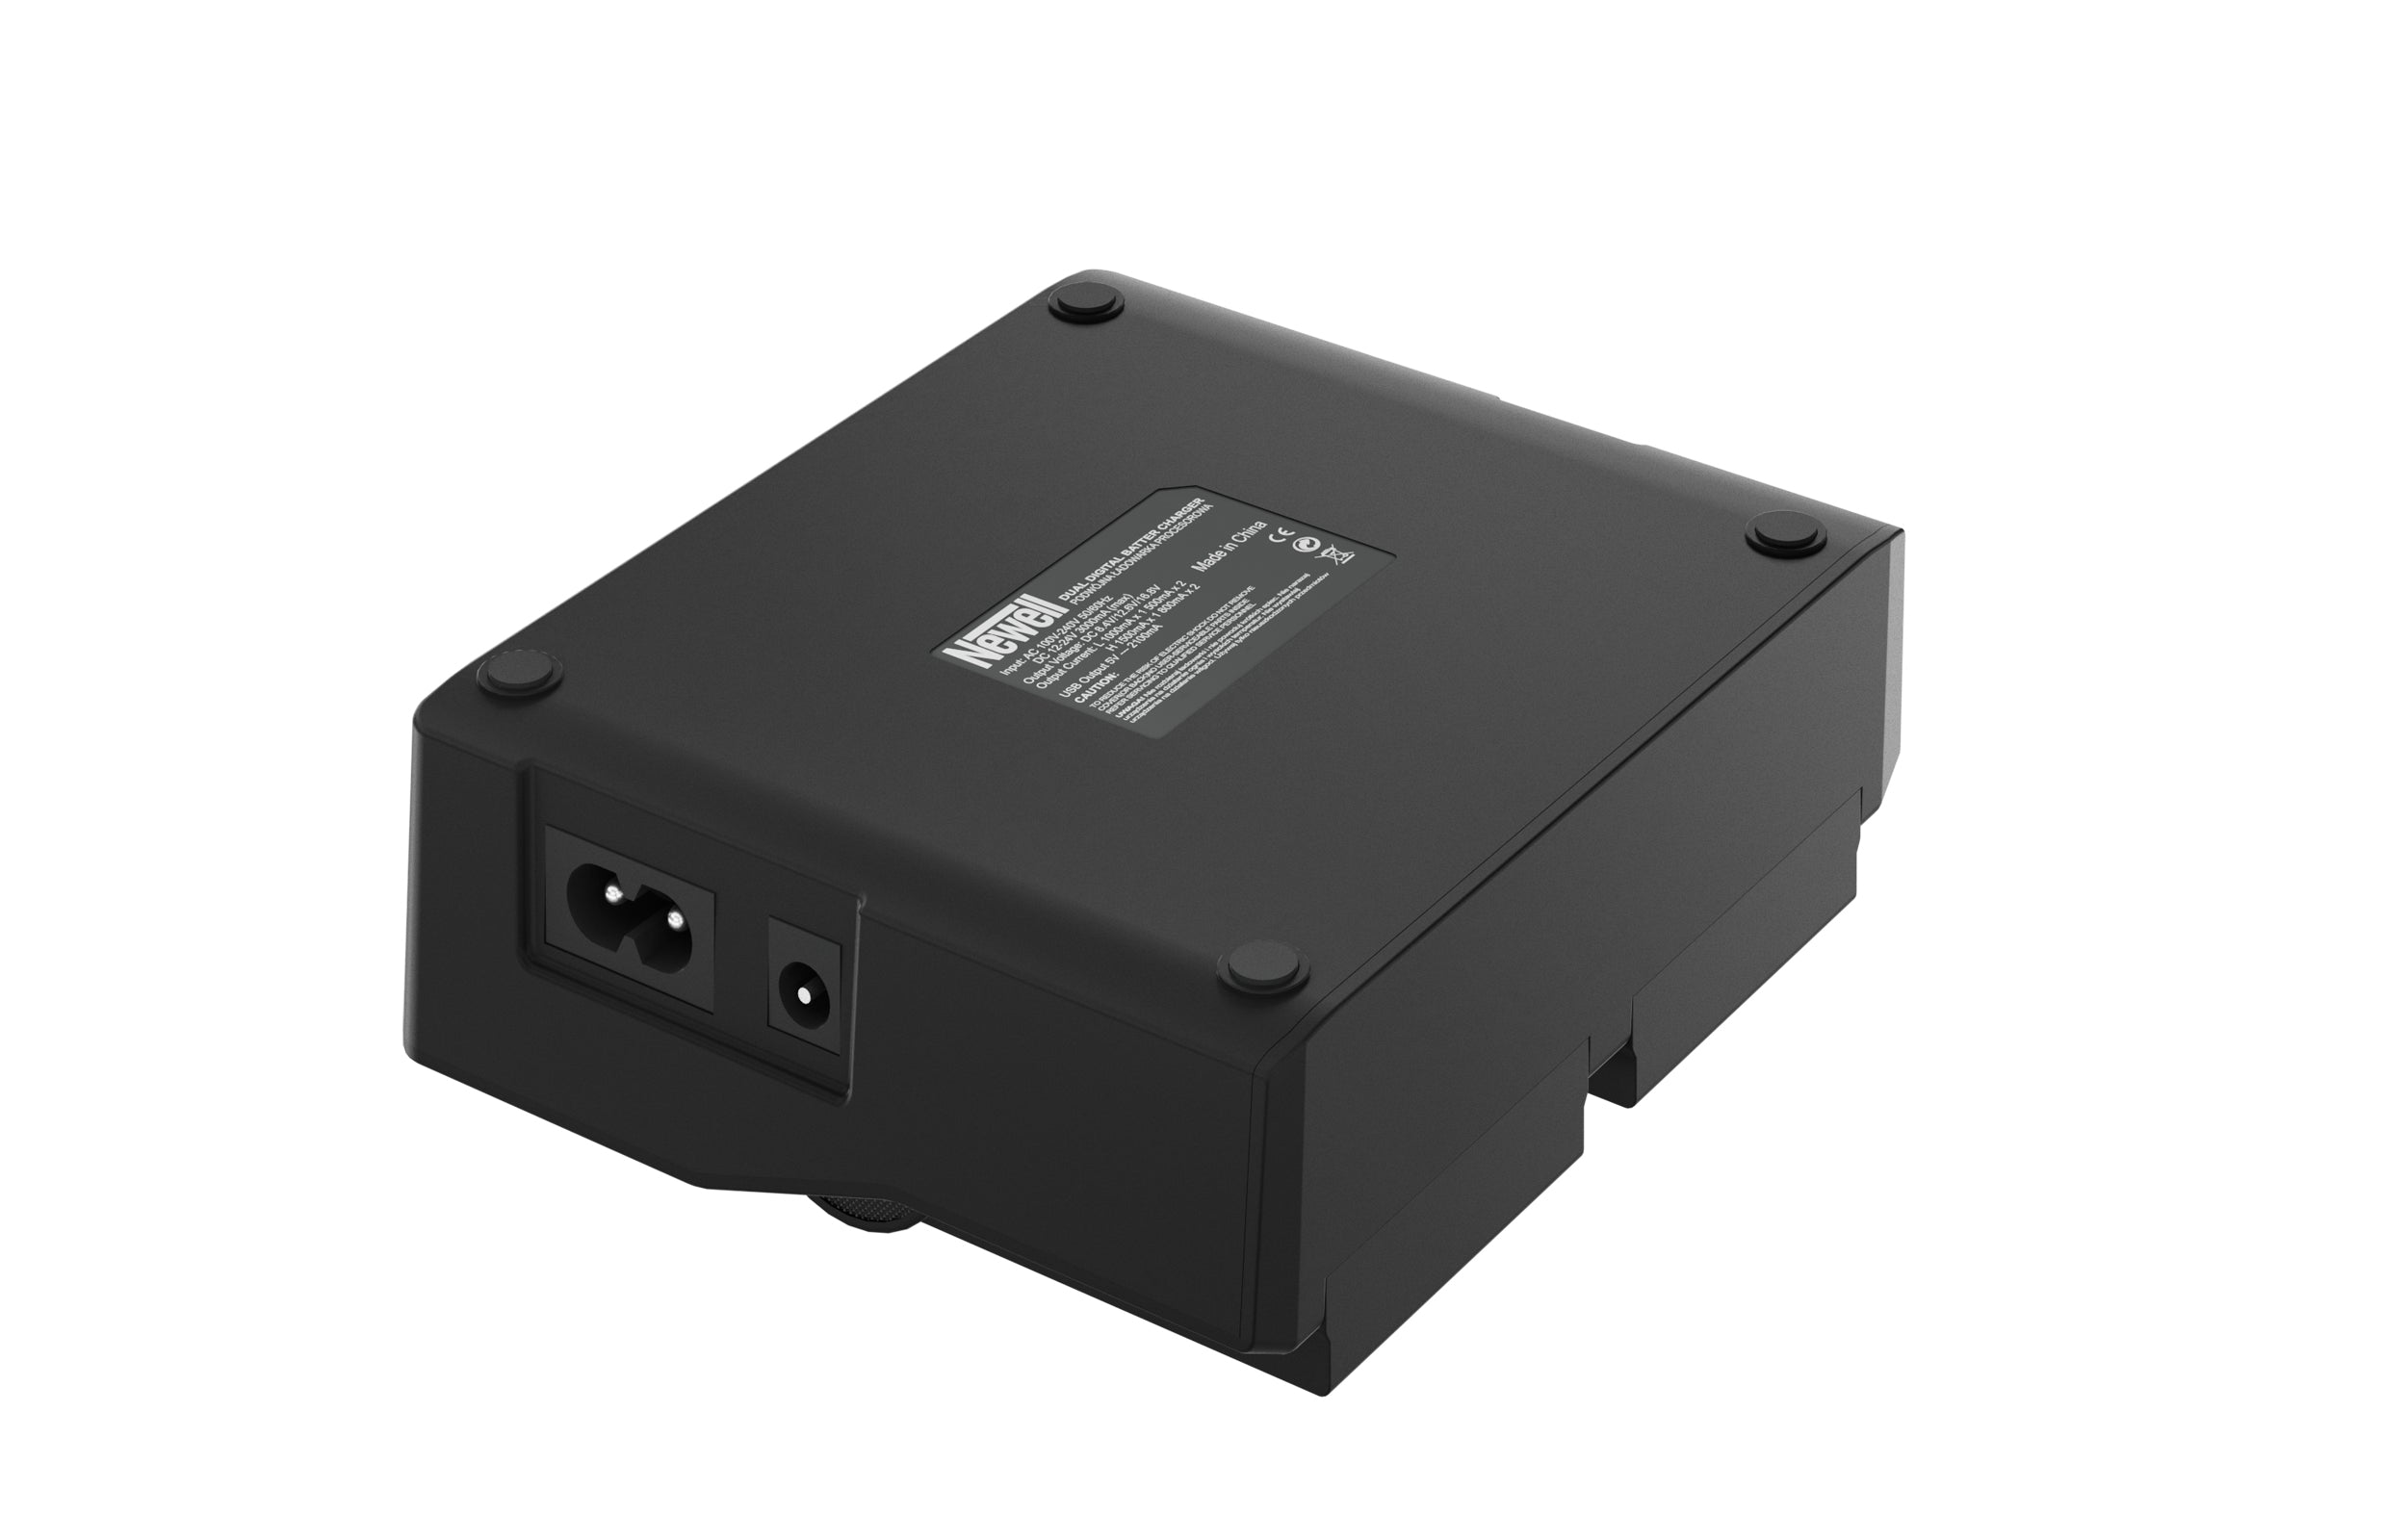 Newell DC-LCD twin charger for LP-E6 batteries